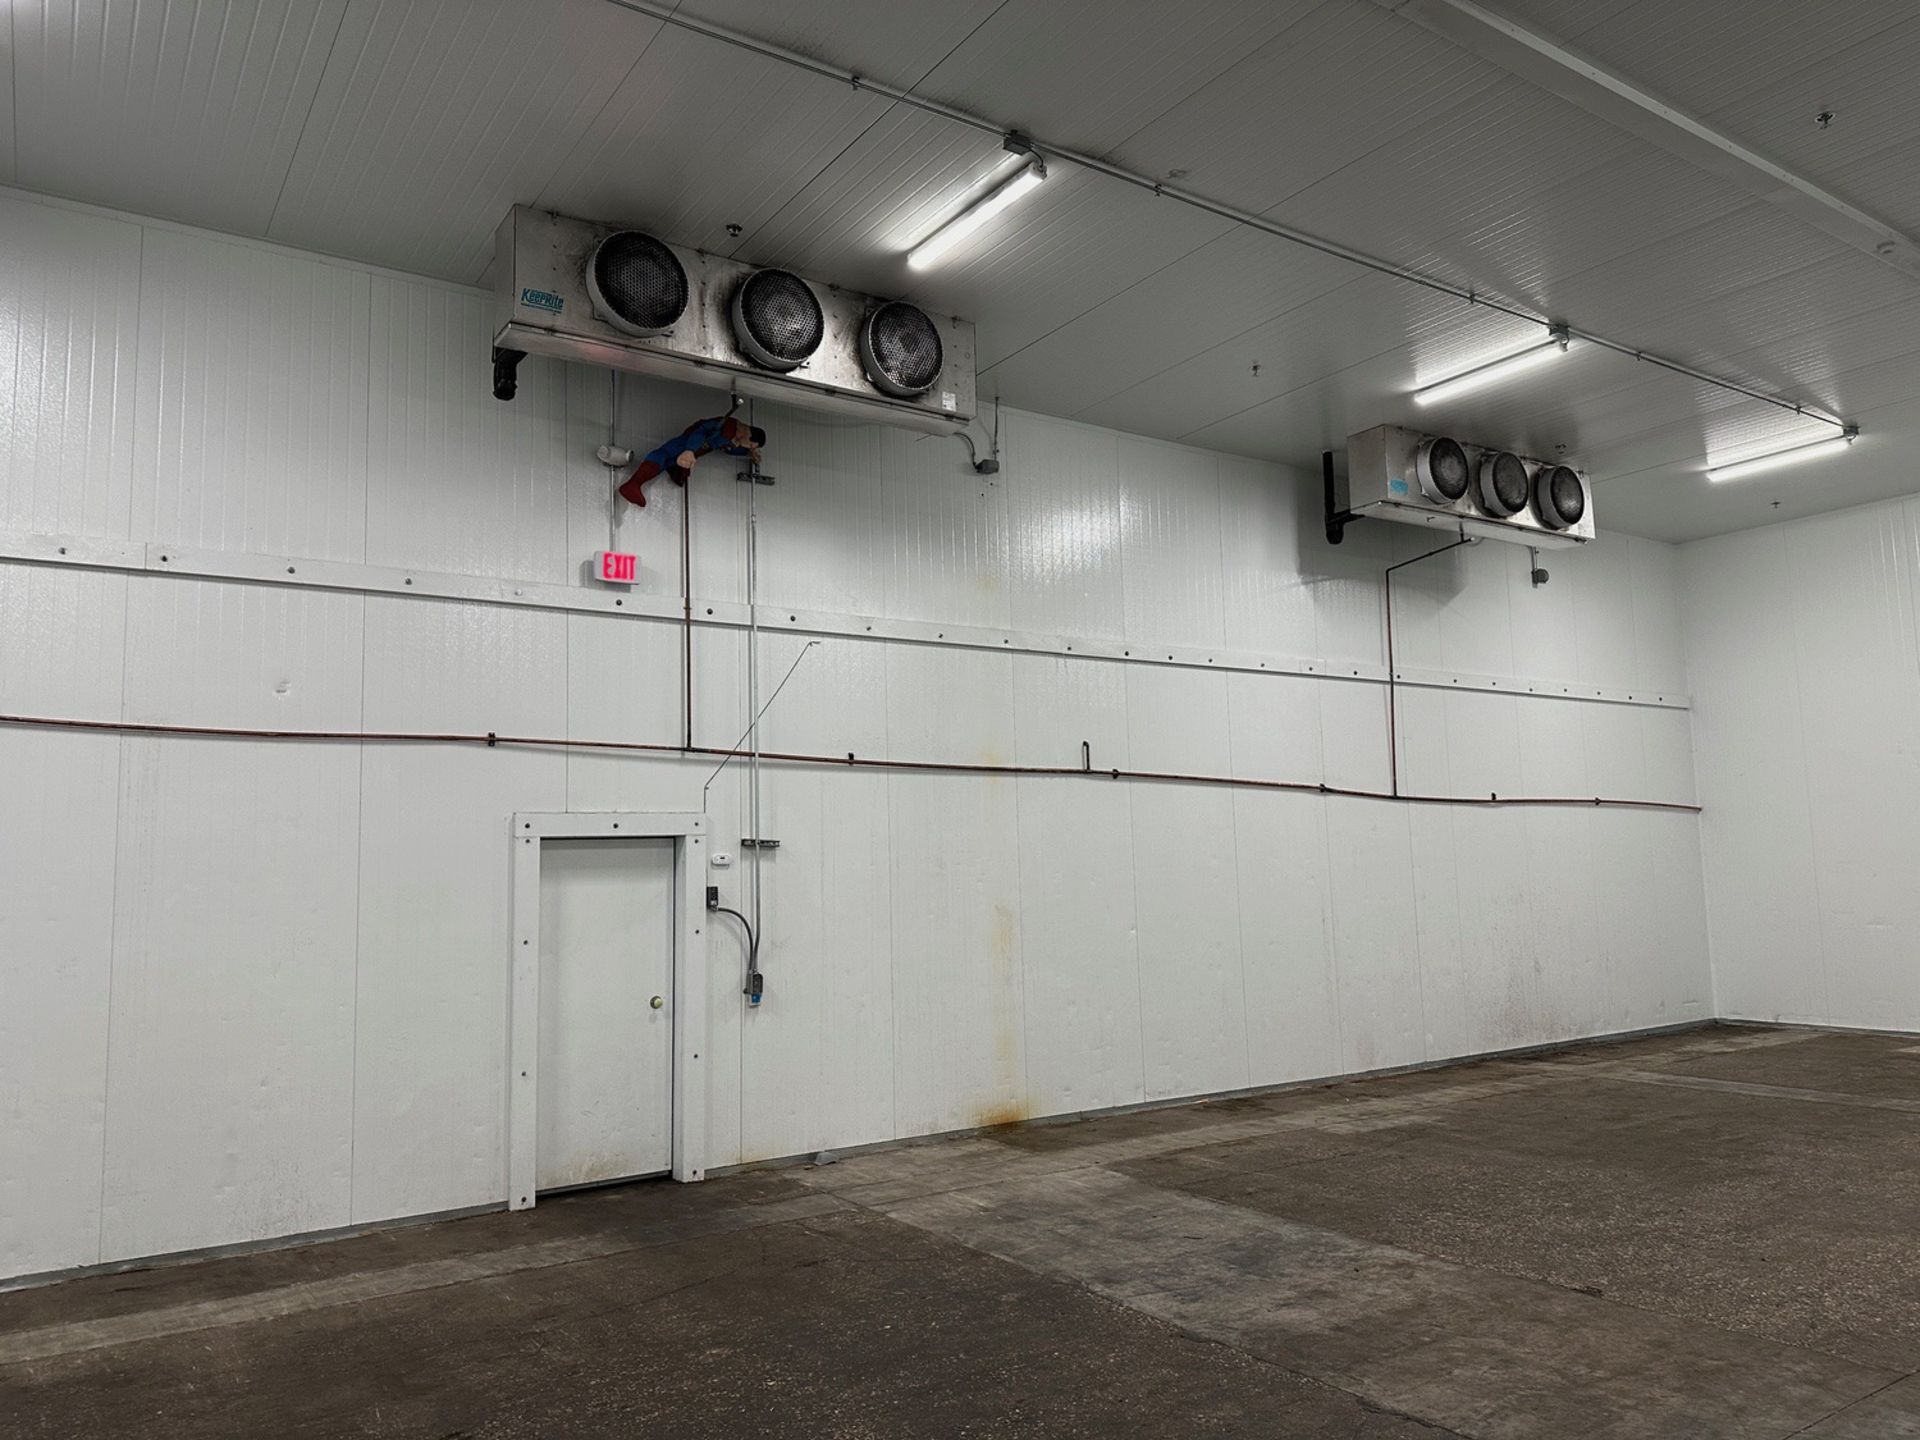 Cold Box - (3) Cooling Units - Shared Wall - (Approx. 32' x 77' x 18' - 8' x 10' Drive In Door - Man - Image 5 of 14